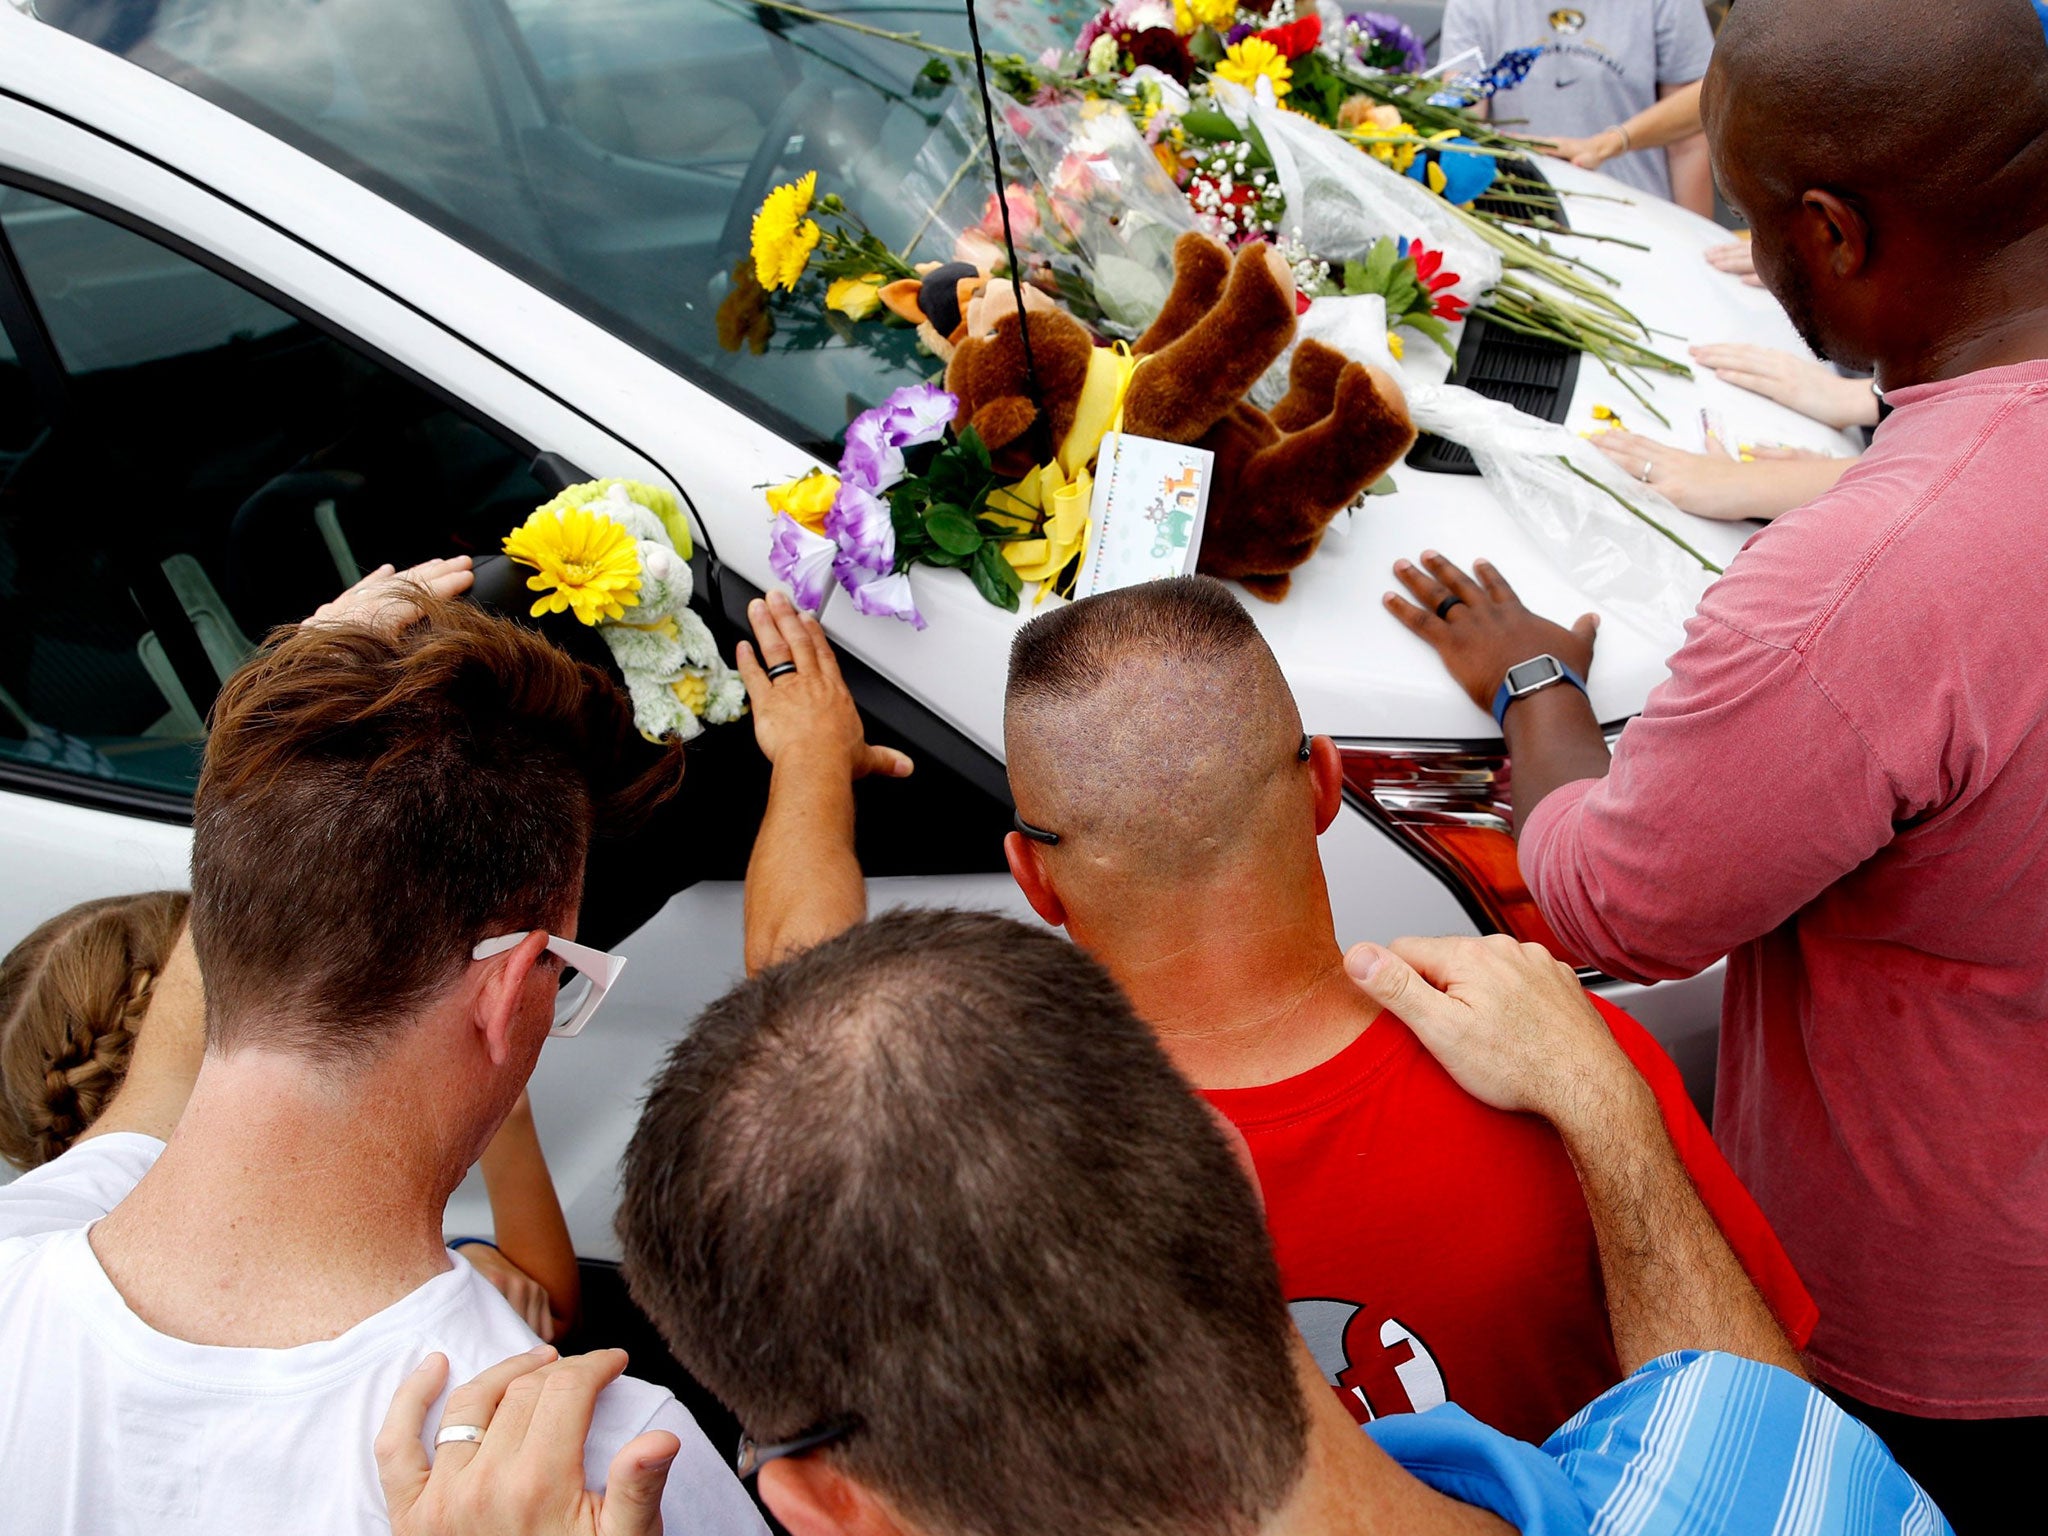 The victims’ cars, left in a nearby parking lot ahead of the tour, were adorned with flowers, stuffed animals, balloons and handwritten notes expressing condolences